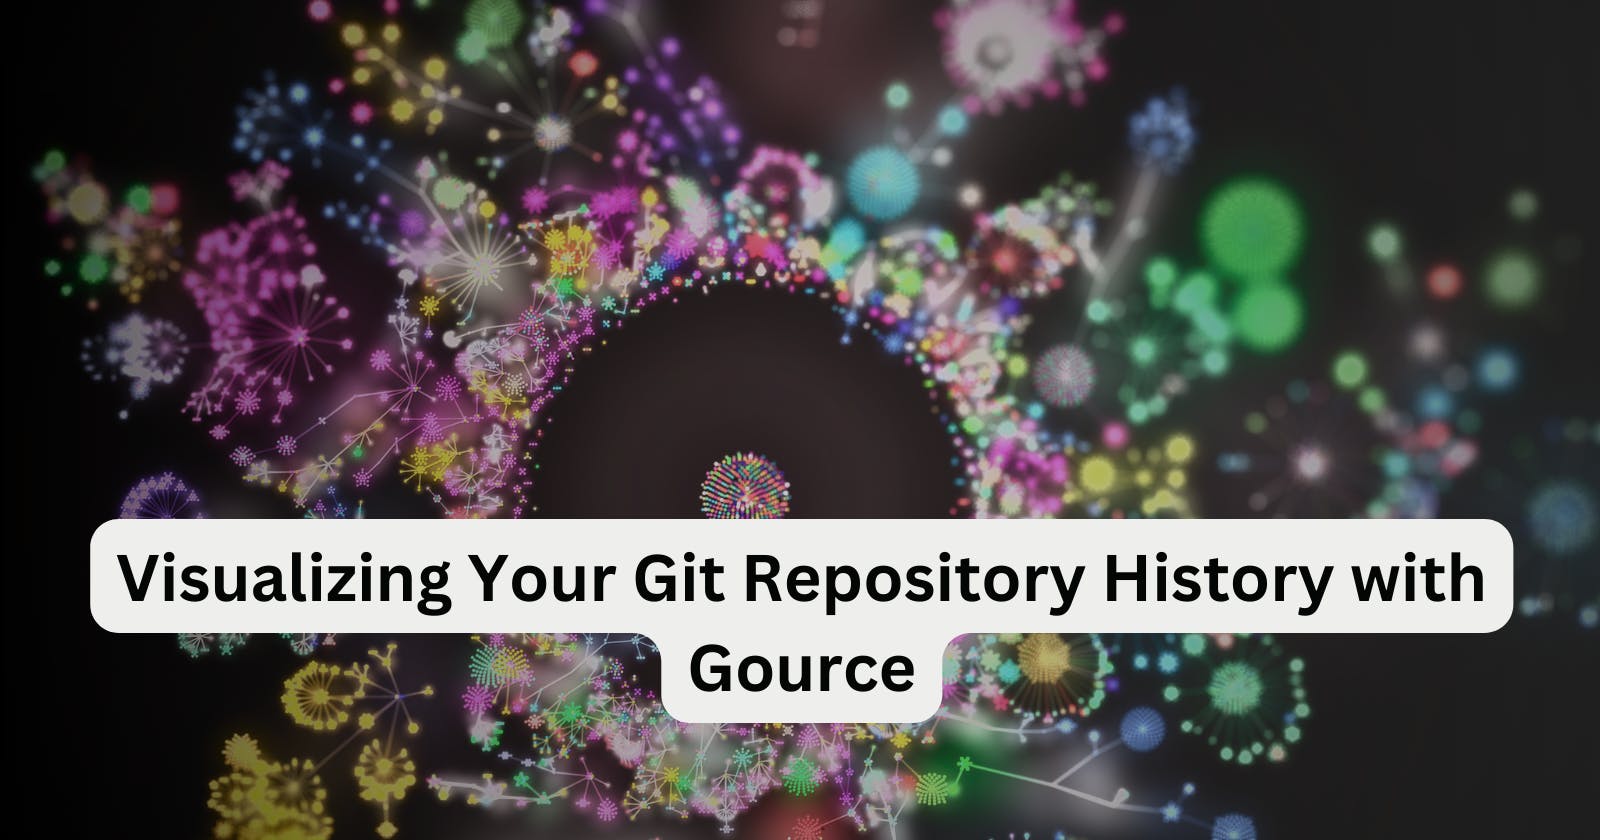 Visualizing Your Git Repository History with Gource